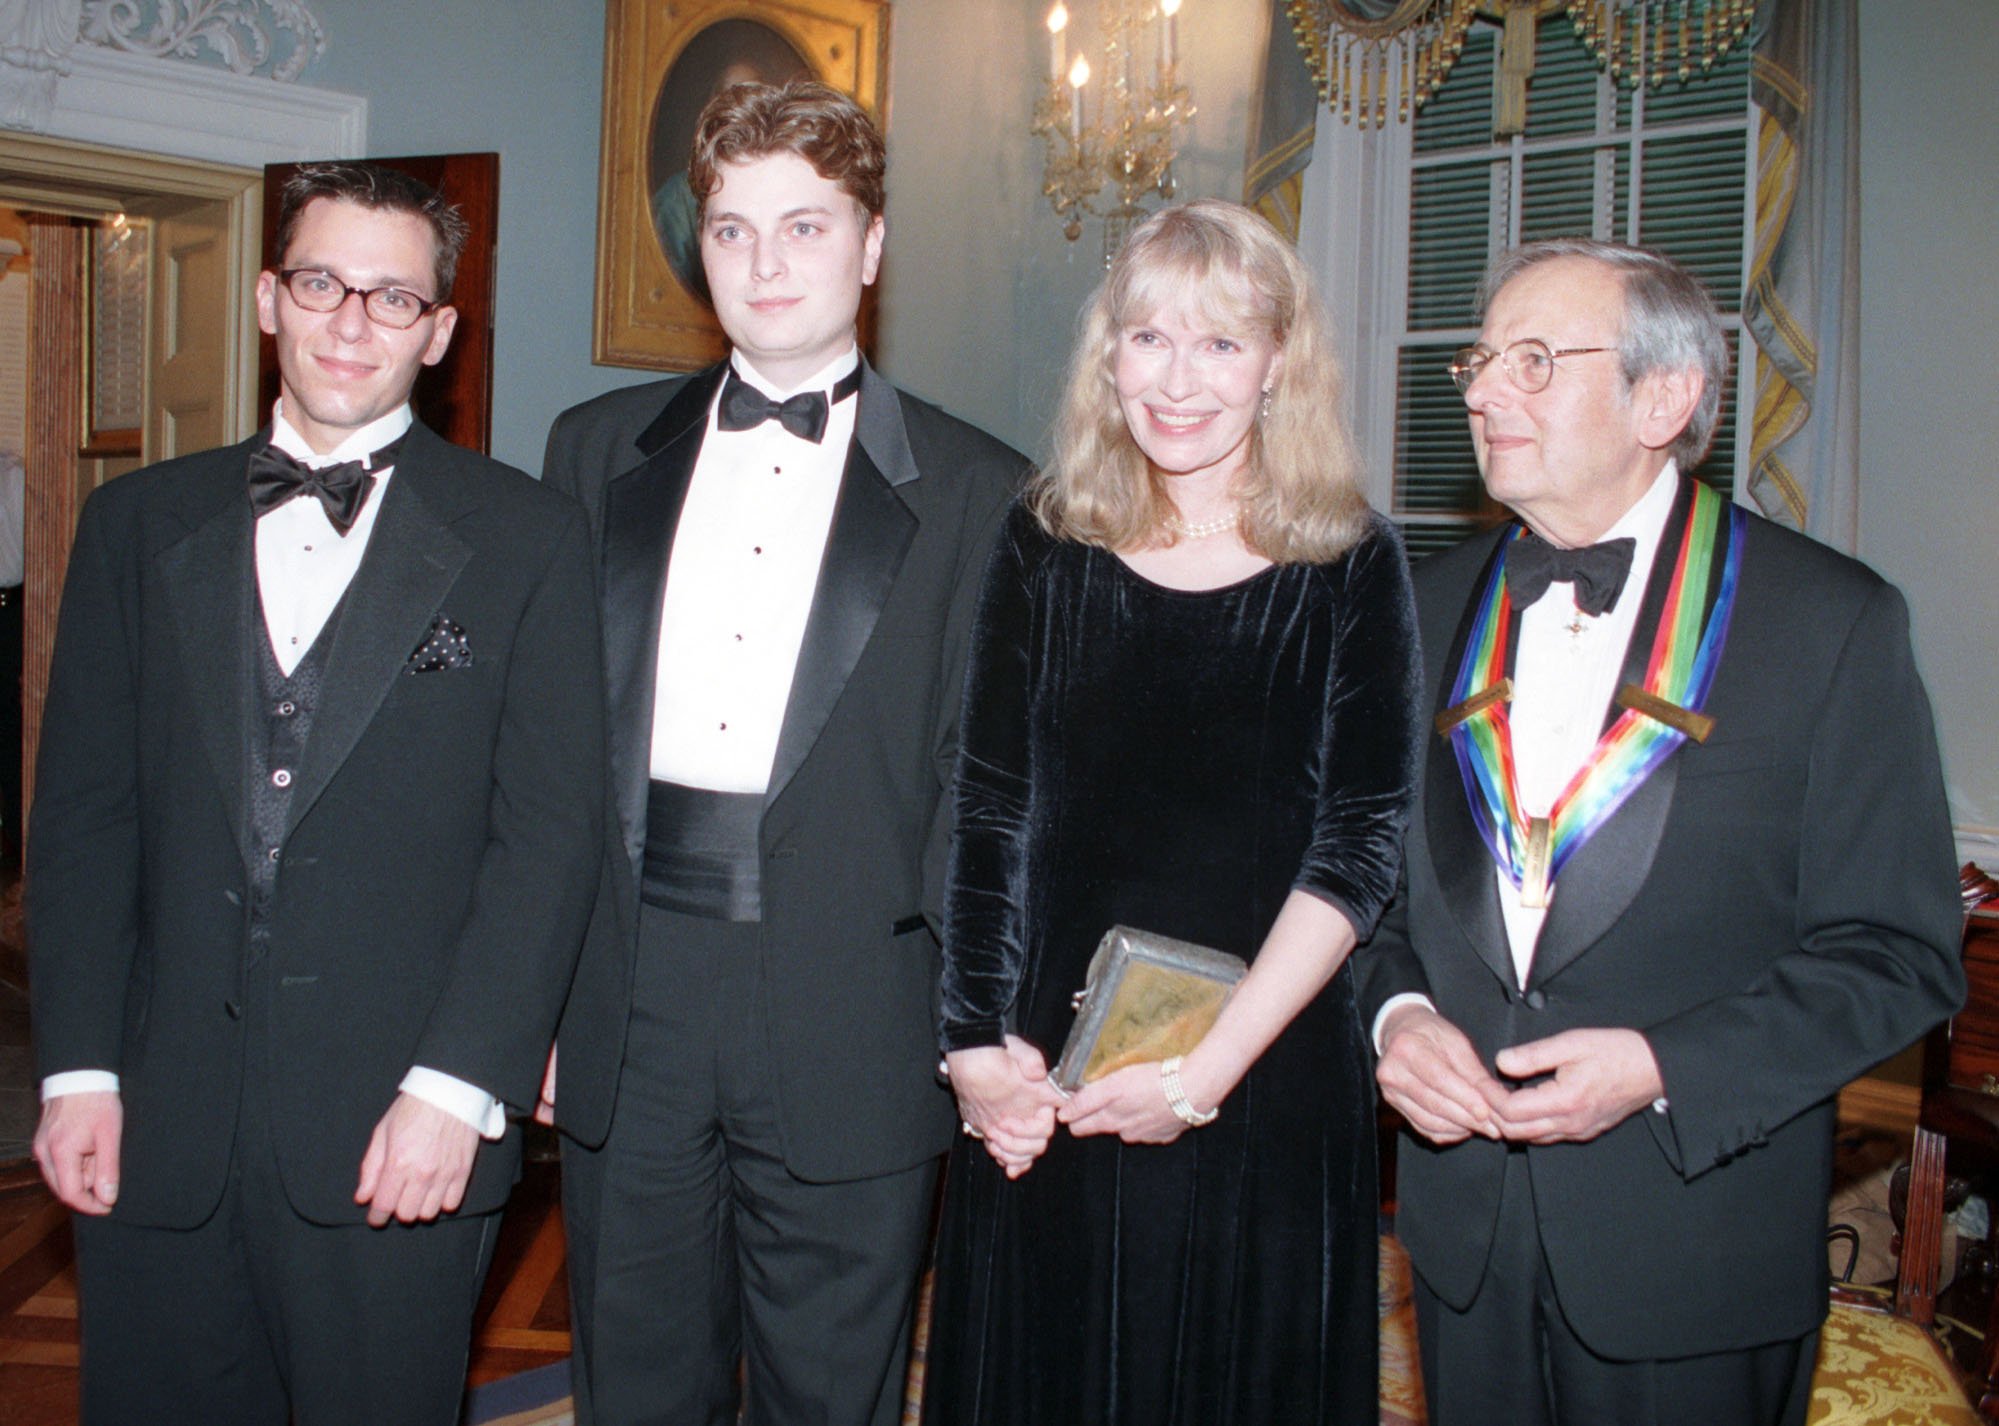 Andre Previn, Mia Farrow and their children Fletcher and Matthew during the 1998 Kennedy Center Honors in 1998 in Washington, DC. | Source: Getty Images